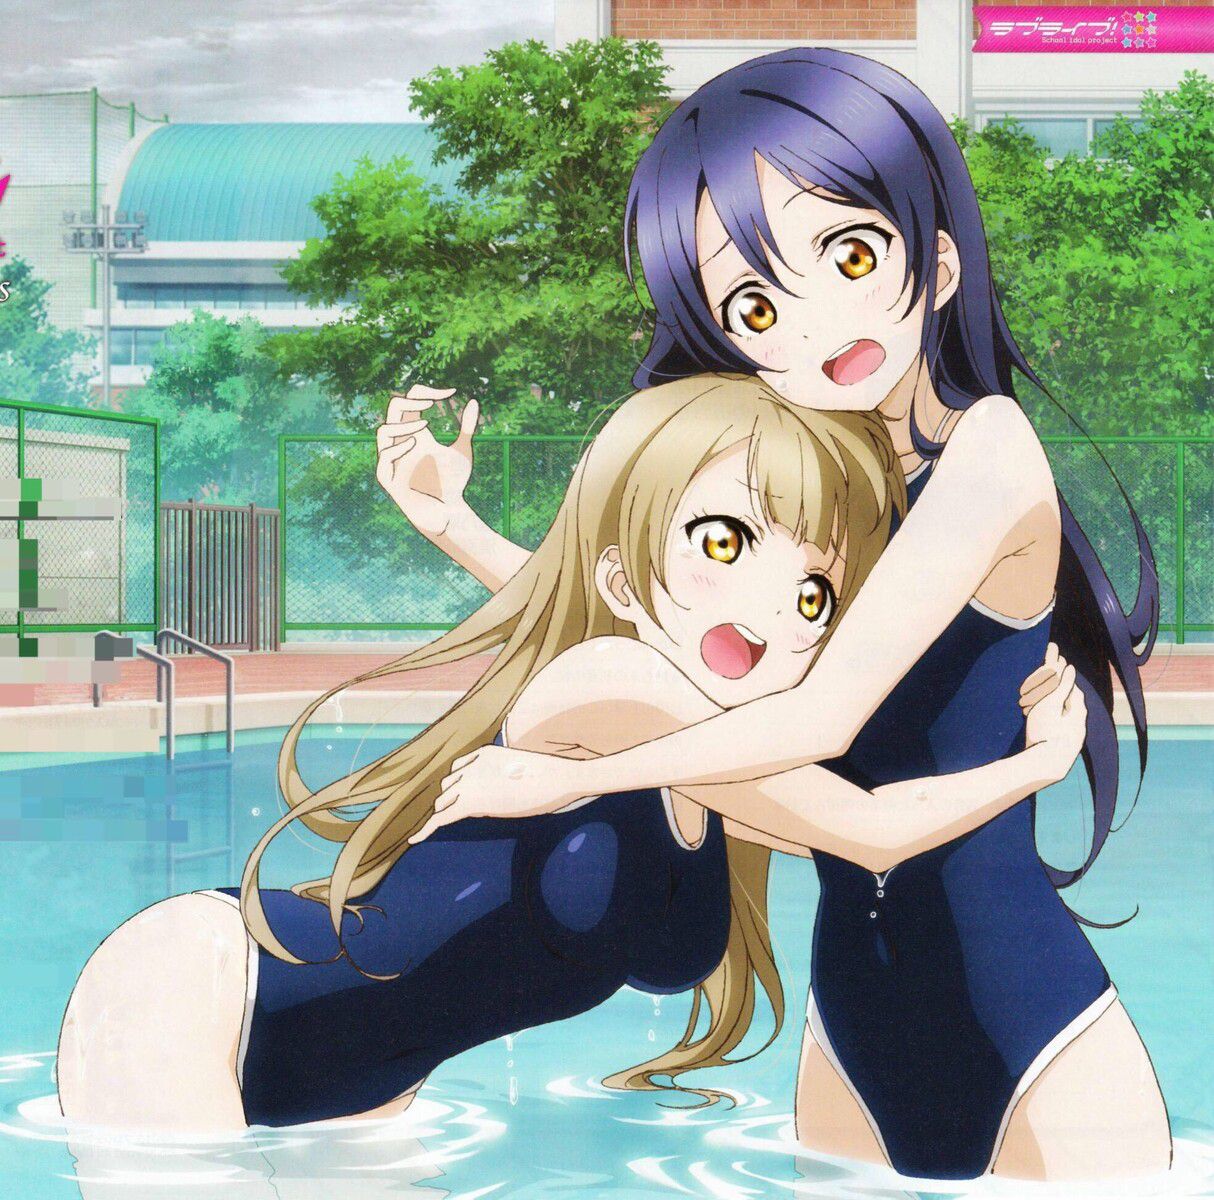 【With images】 The most erotic and syco character in the love live series wwwwwww 5